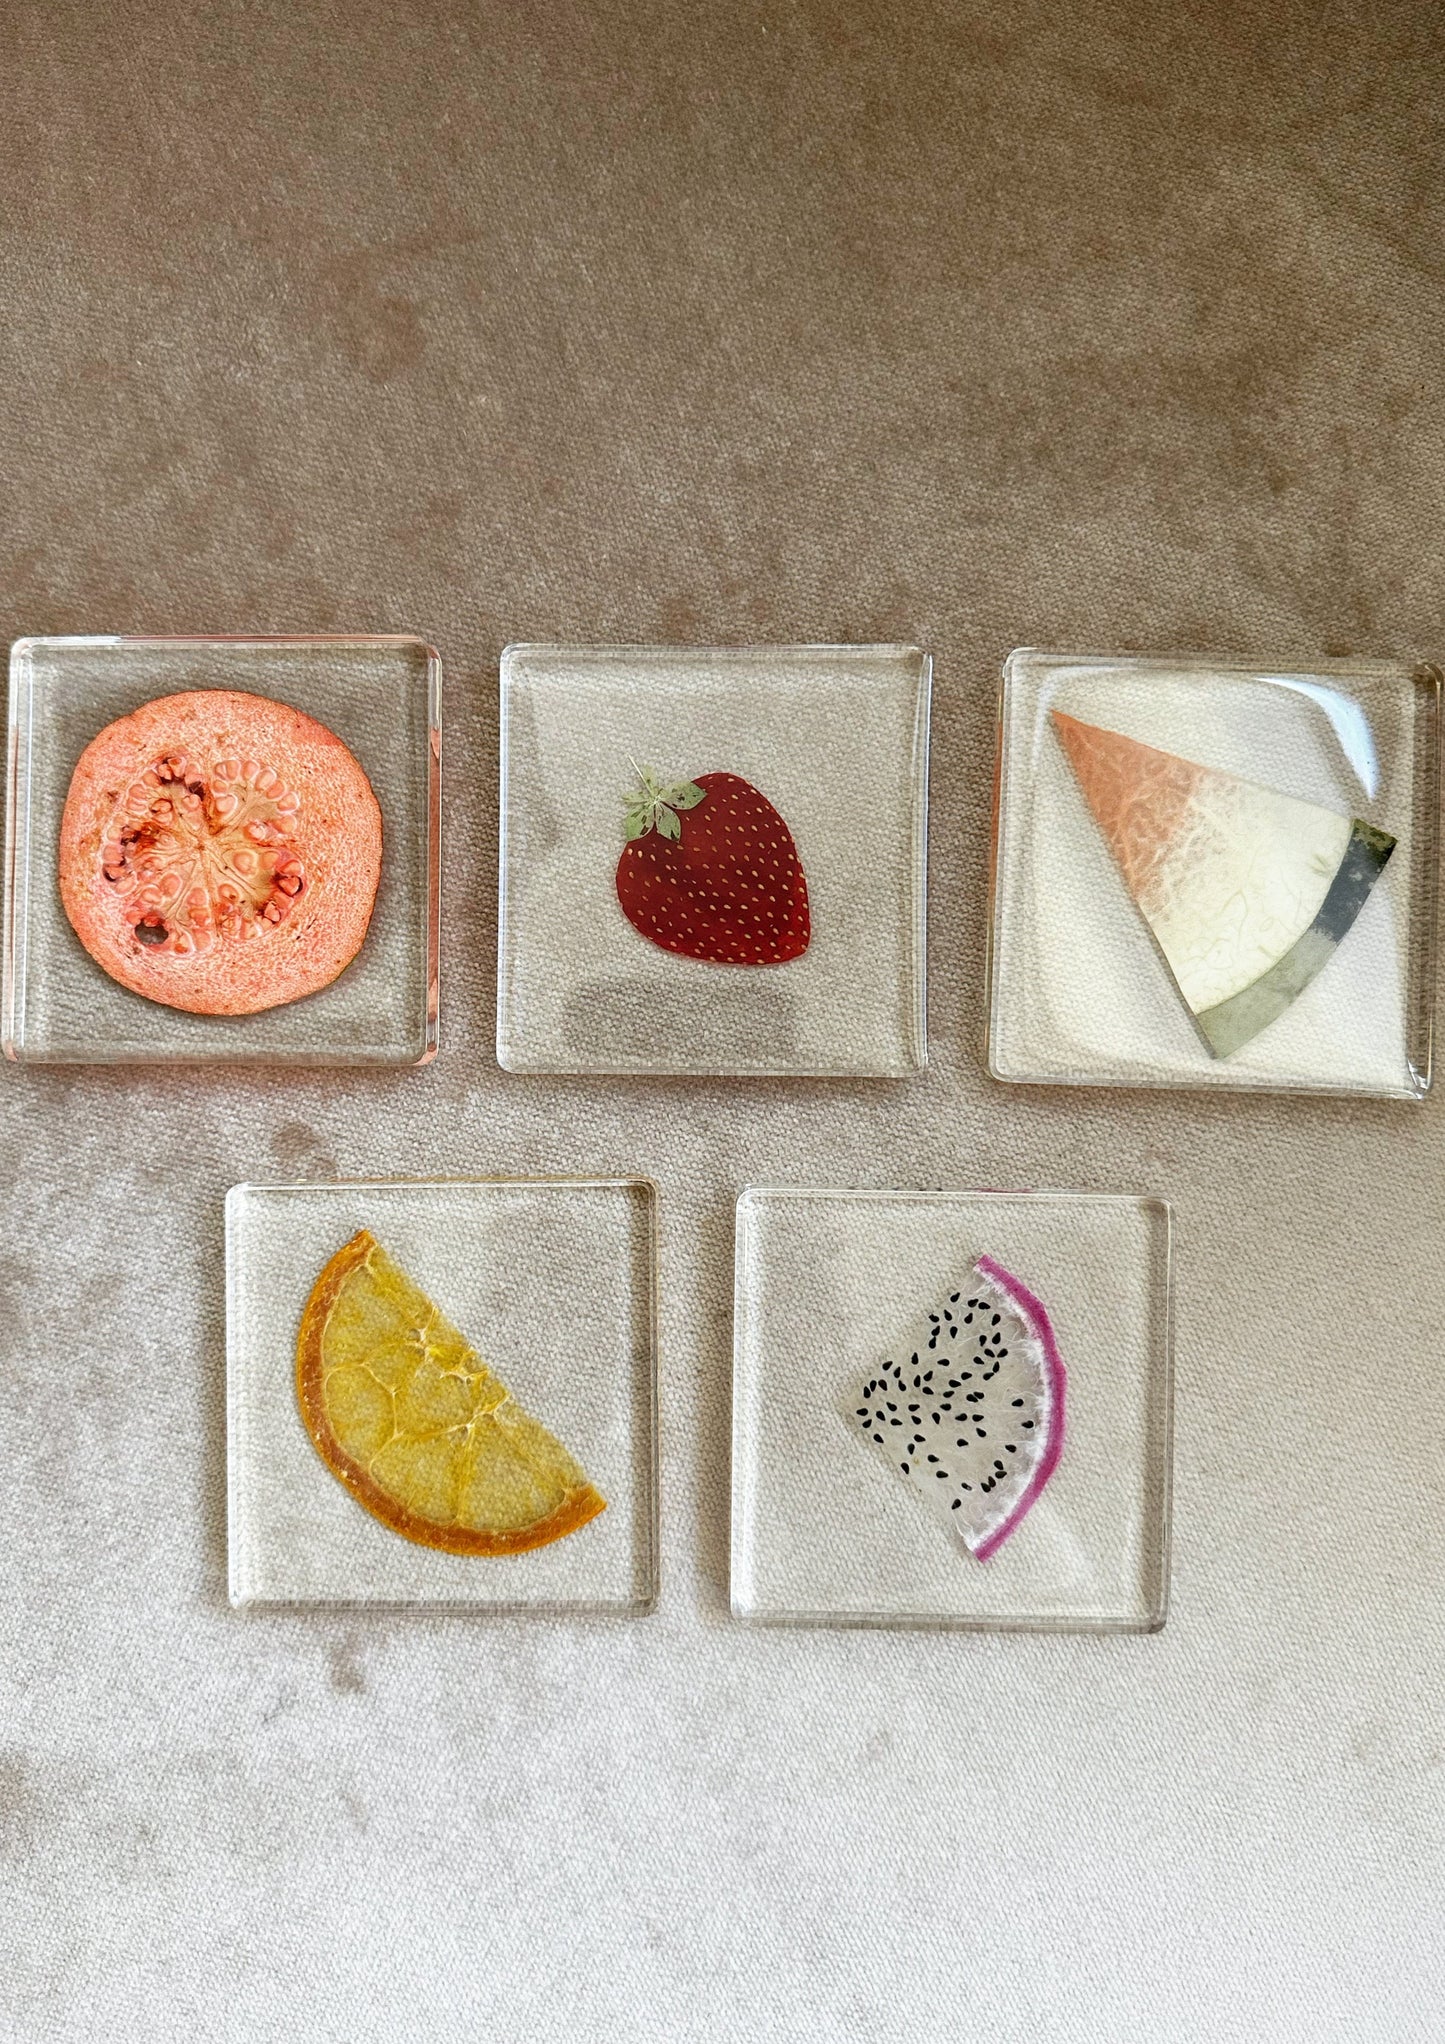 papaya, strawberry, watermelon, orange, and guava  each in a clear resin square coaster